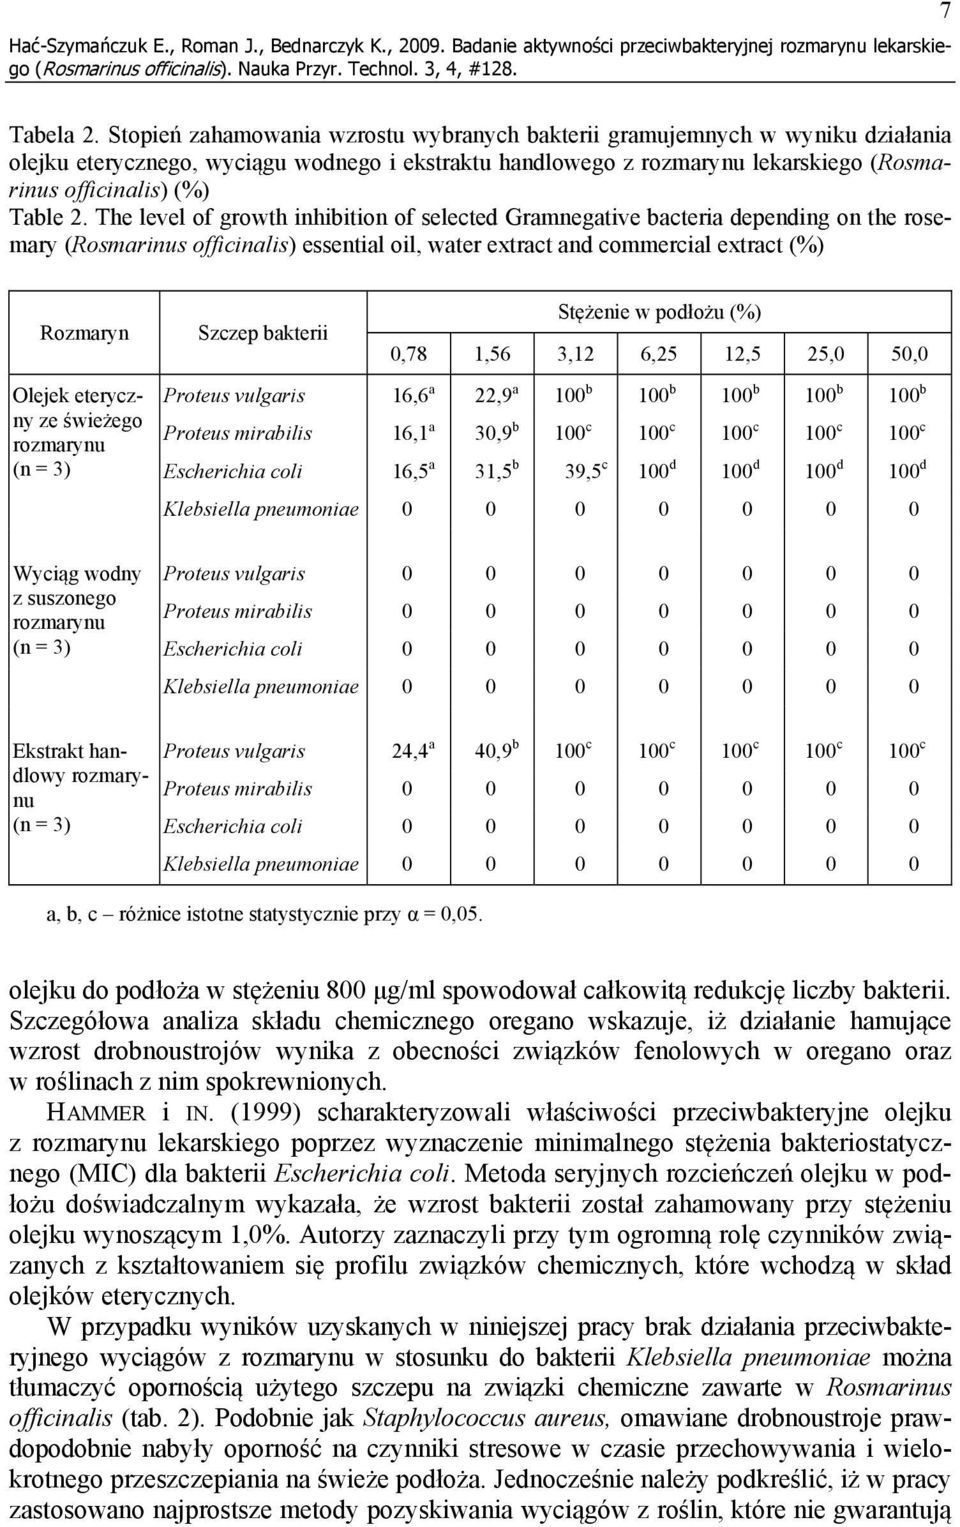 The level of growth inhibition of selected Gramnegative bacteria depending on the rosemary (Rosmarinus officinalis) essential oil, water extract and commercial extract (%) Rozmaryn Olejek eteryczny